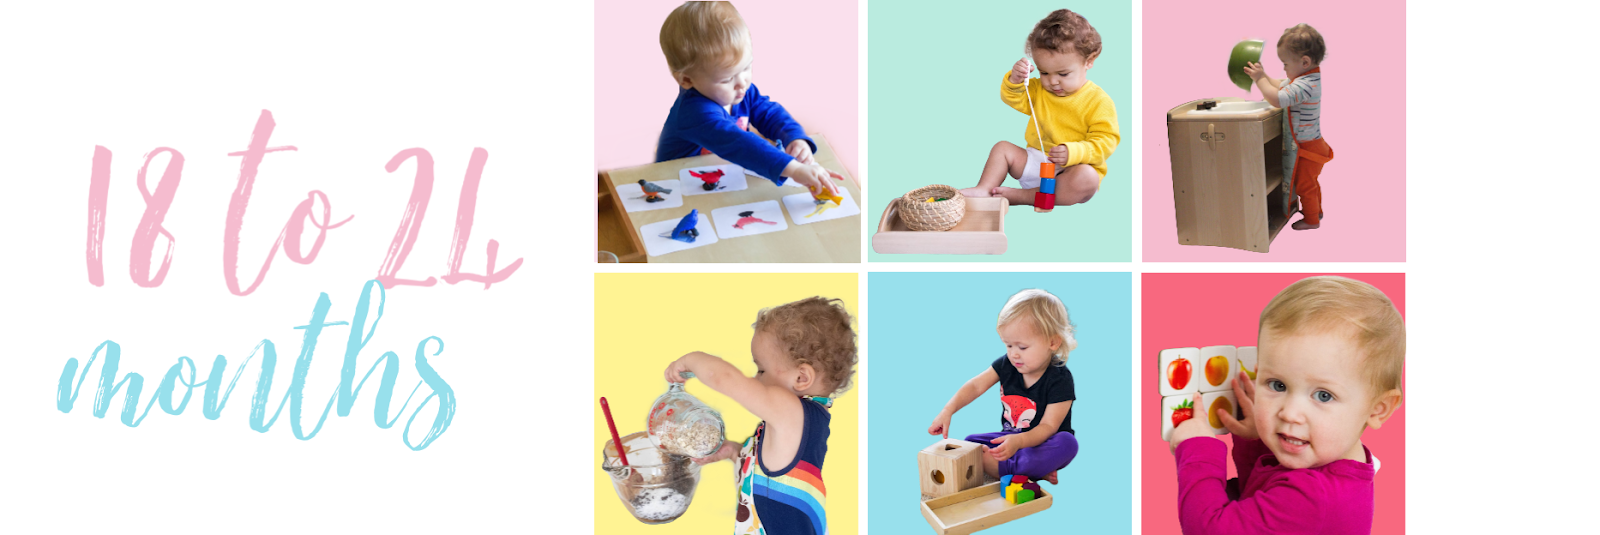 Montessori friendly activities, toys, and spaces for toddlers ages 18 to 24 months.